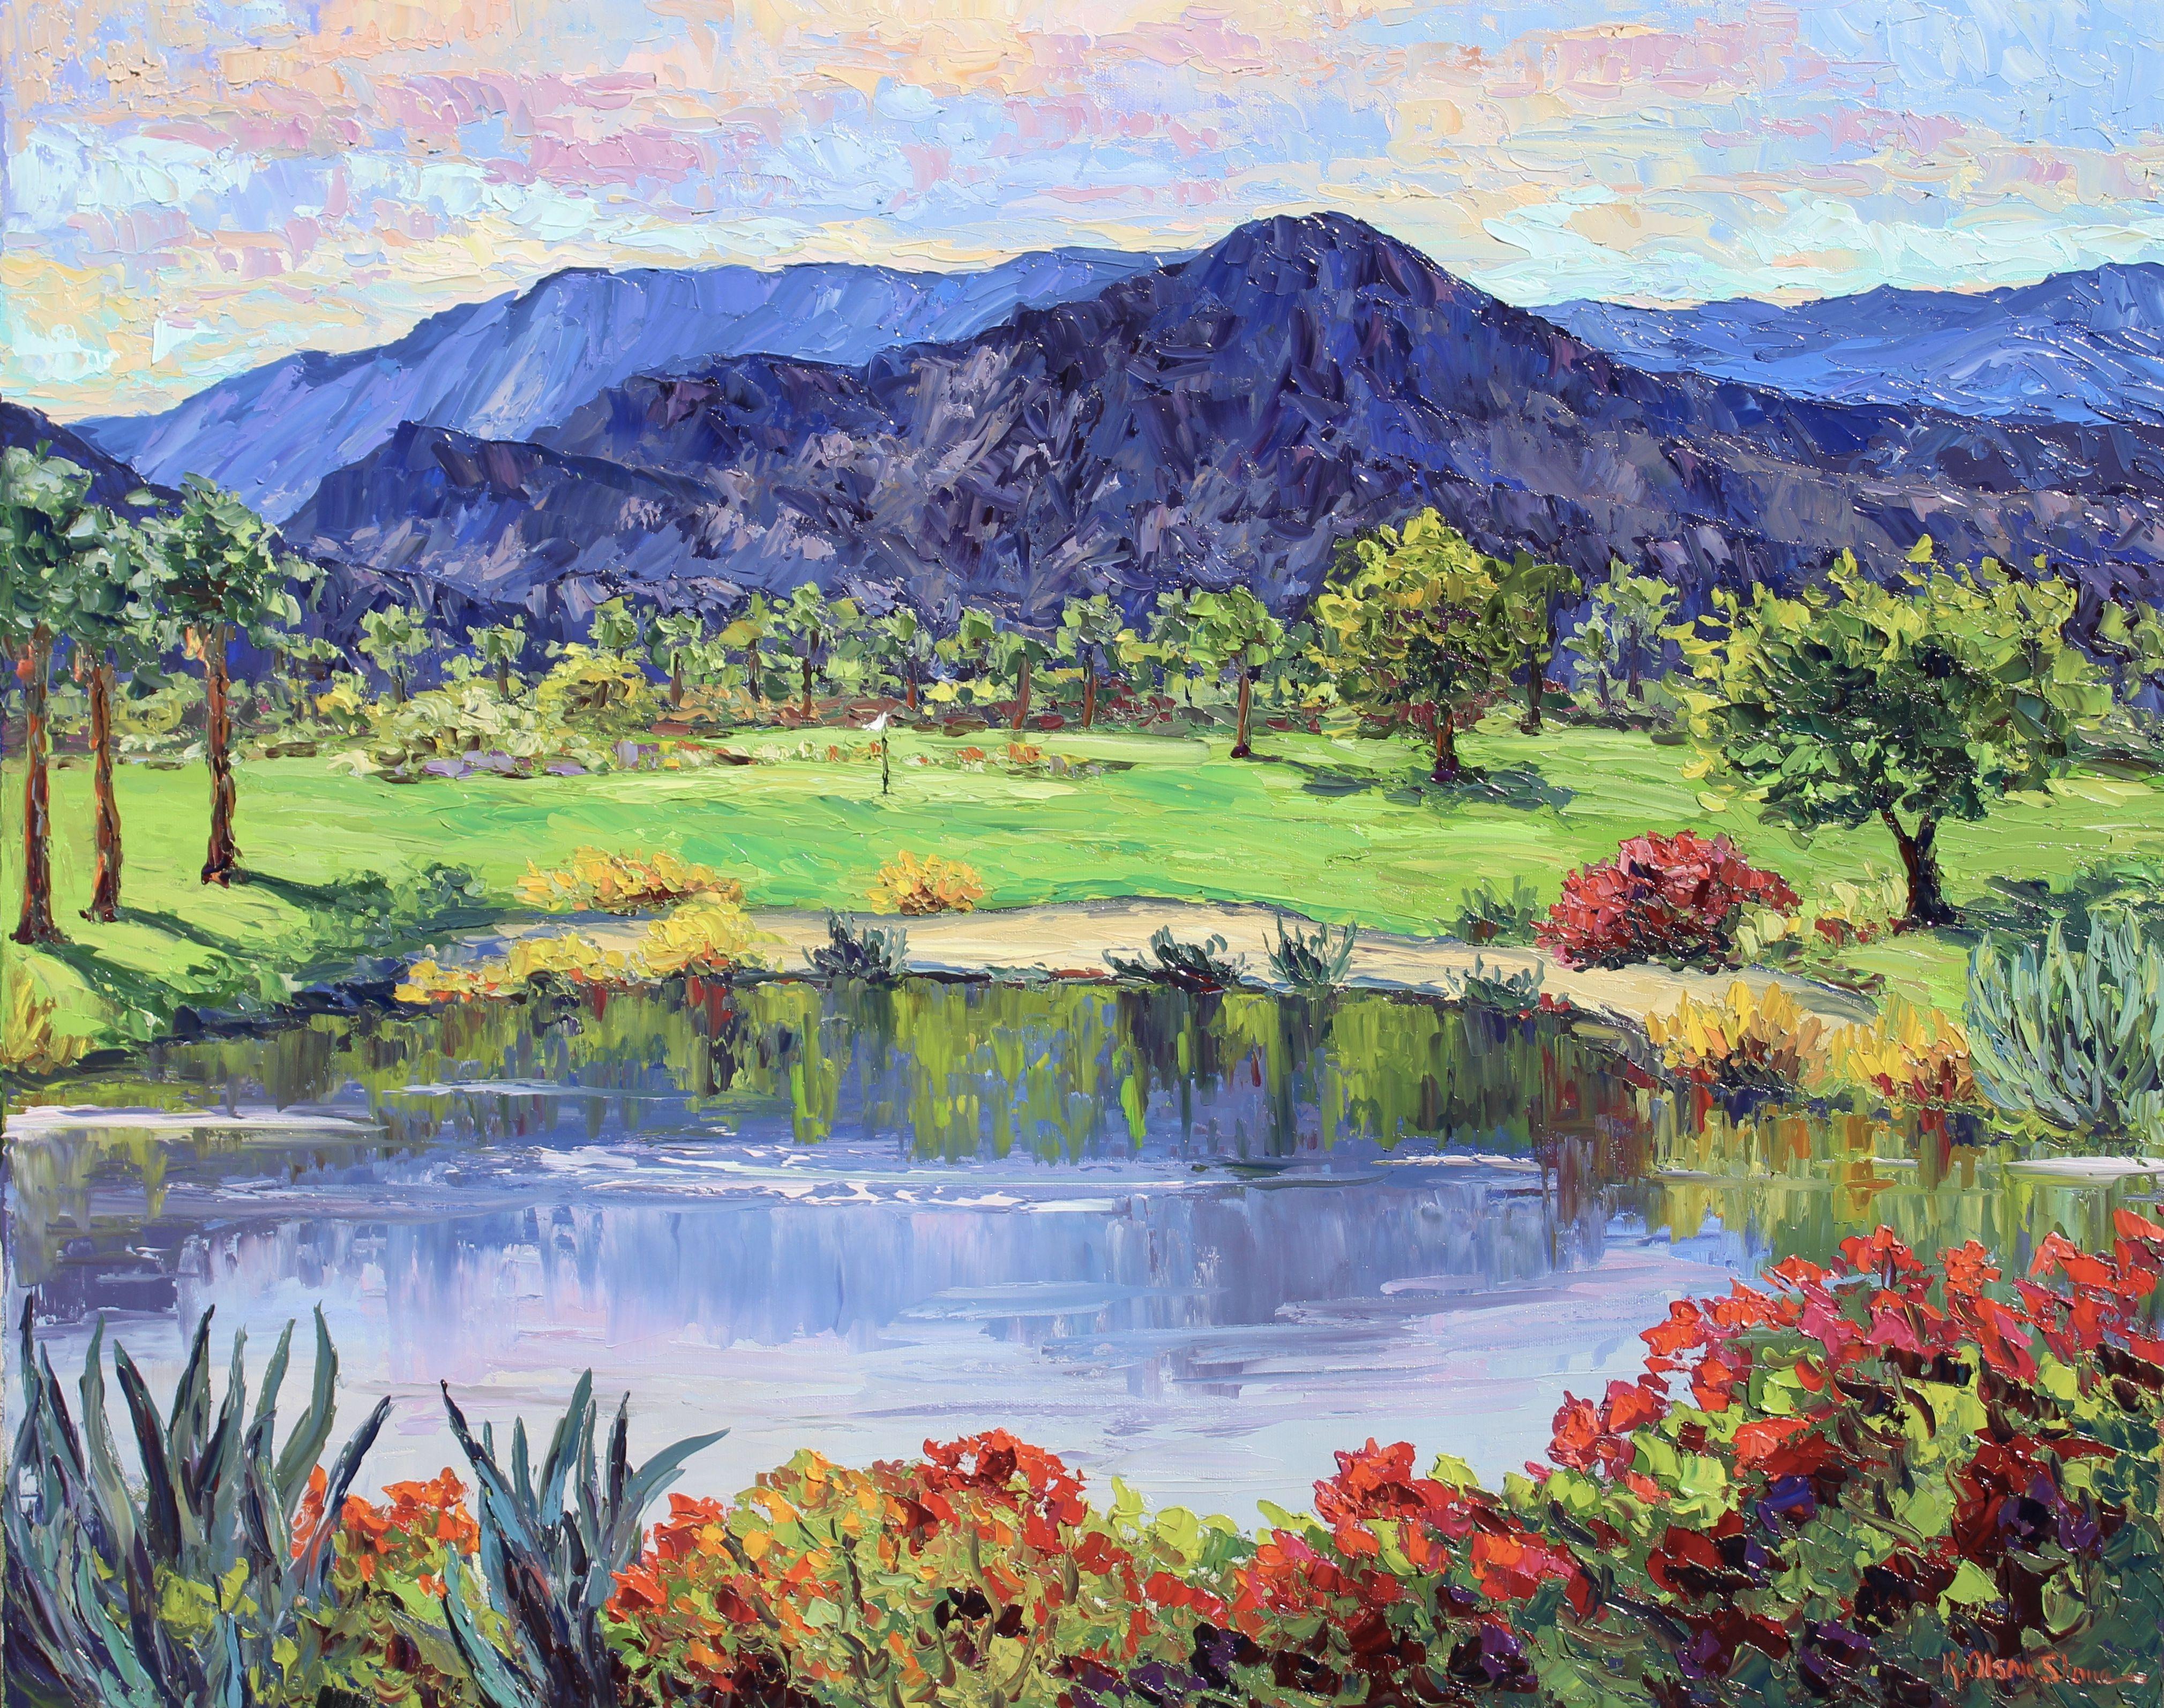 An original golf course landscape painting of Indian Wells Golf Course, Indian Wells, California.  Colorful bougainvillea, and palm trees bask in the warm sunshine at the foot of Indian Wells mountains.  This painting comes with a certificate of